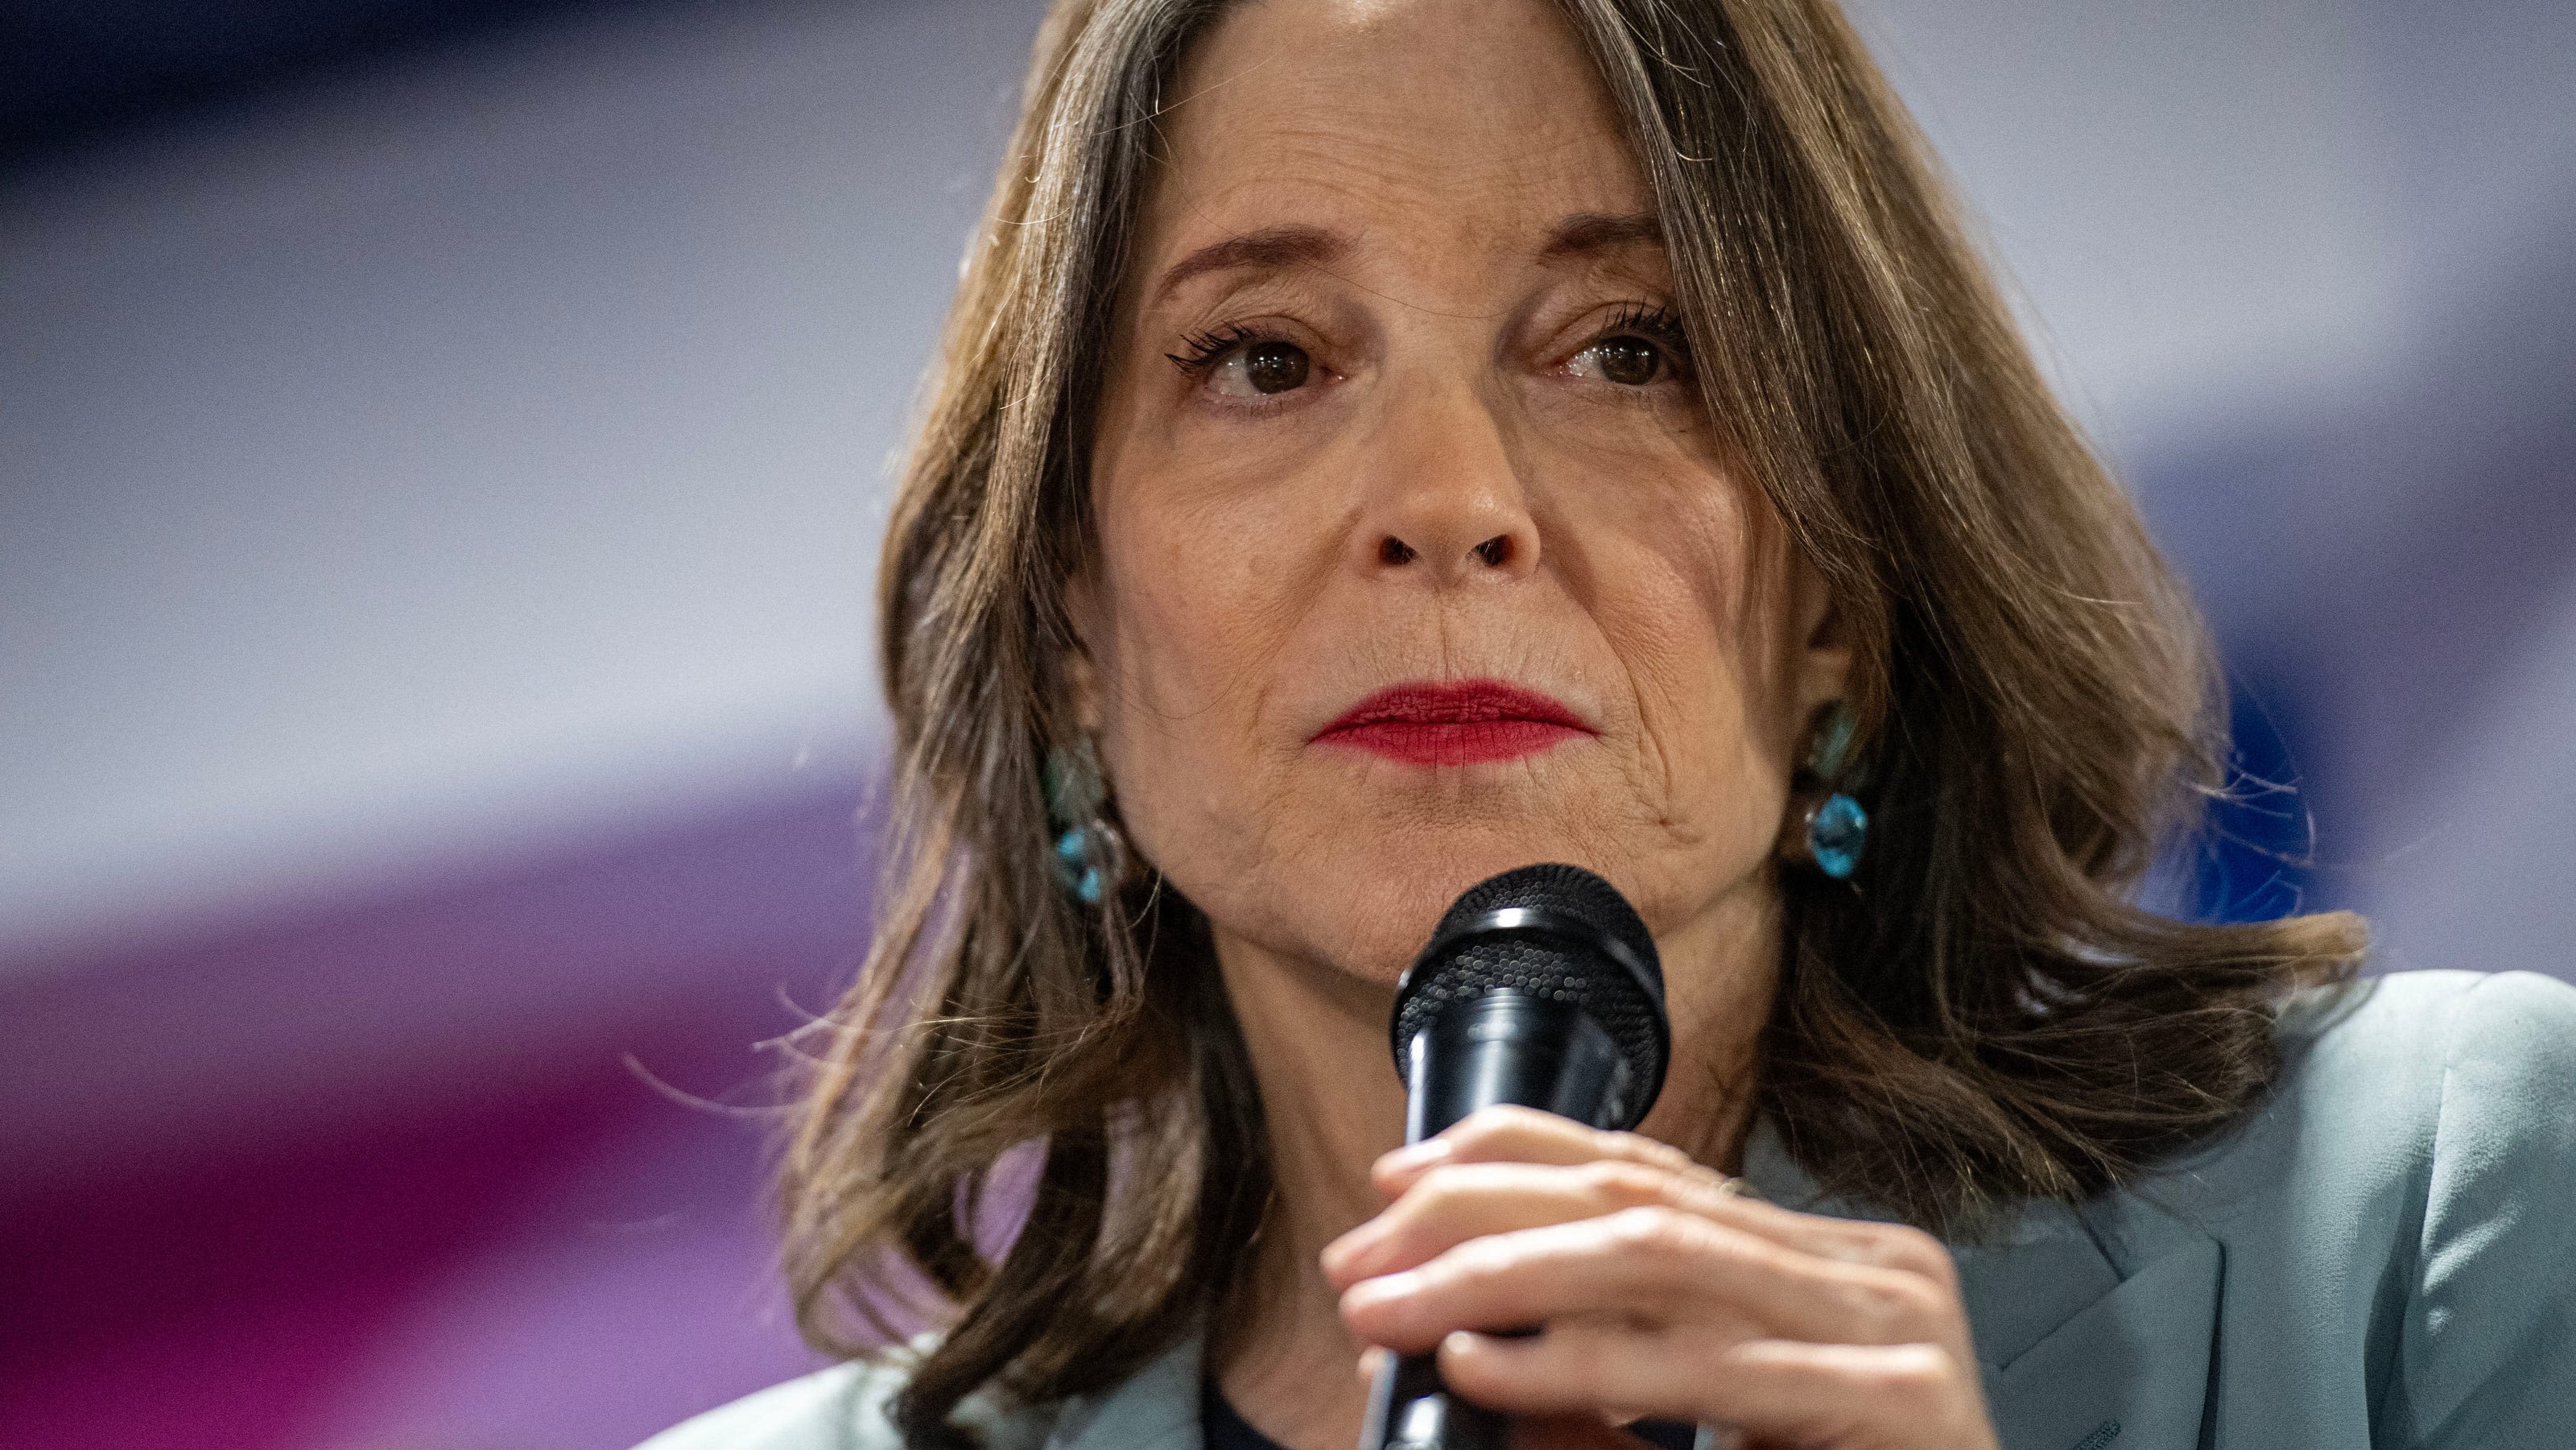 Marianne Williamson lashes out at DNC, accuses party of trying to undermine her campaign